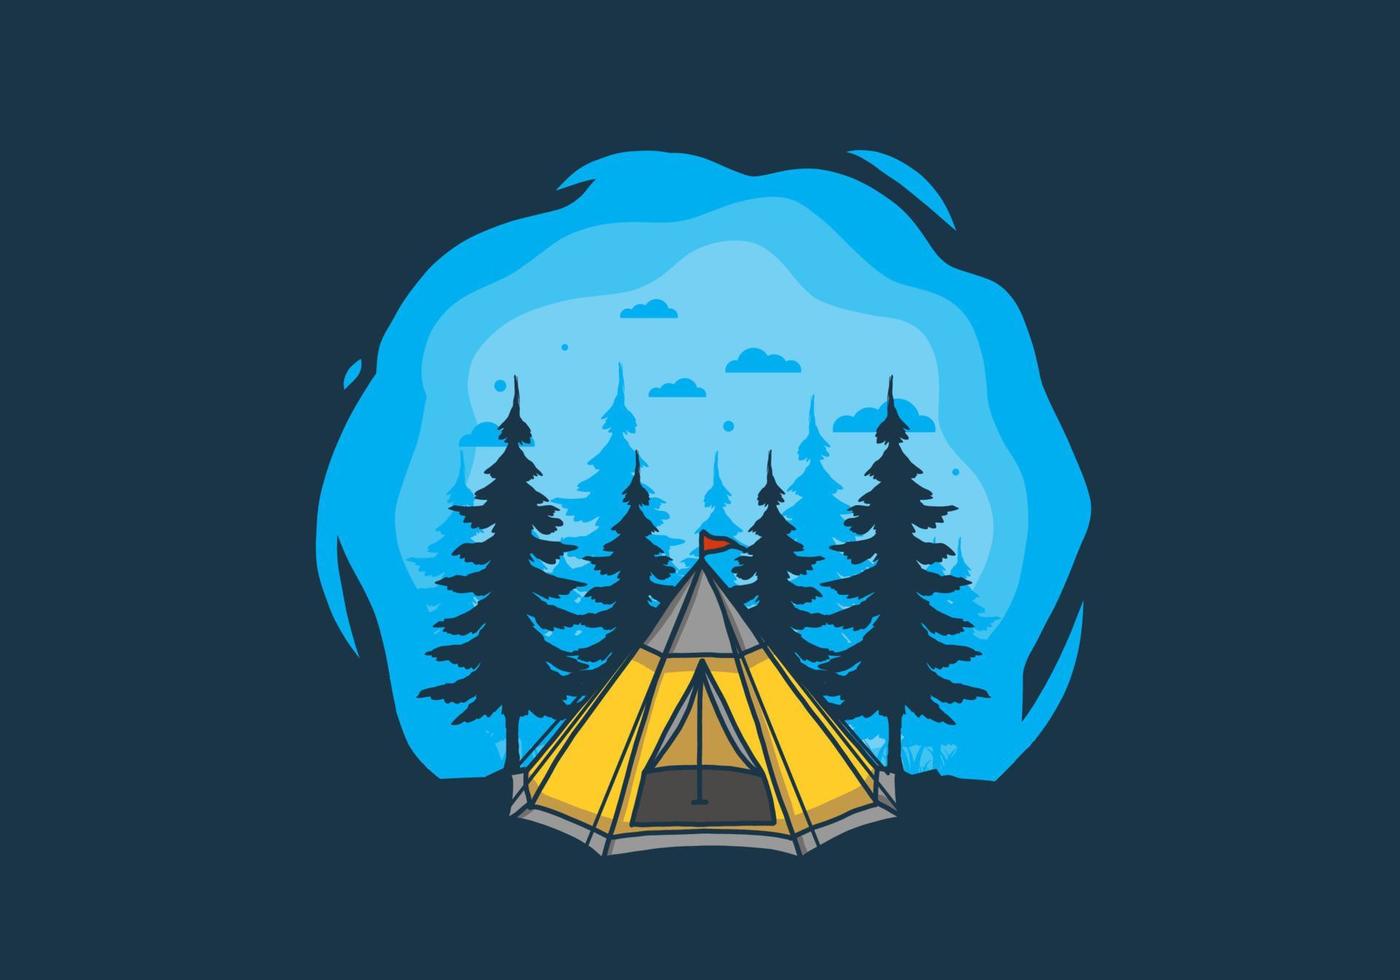 Cone tent and pine trees illustration vector